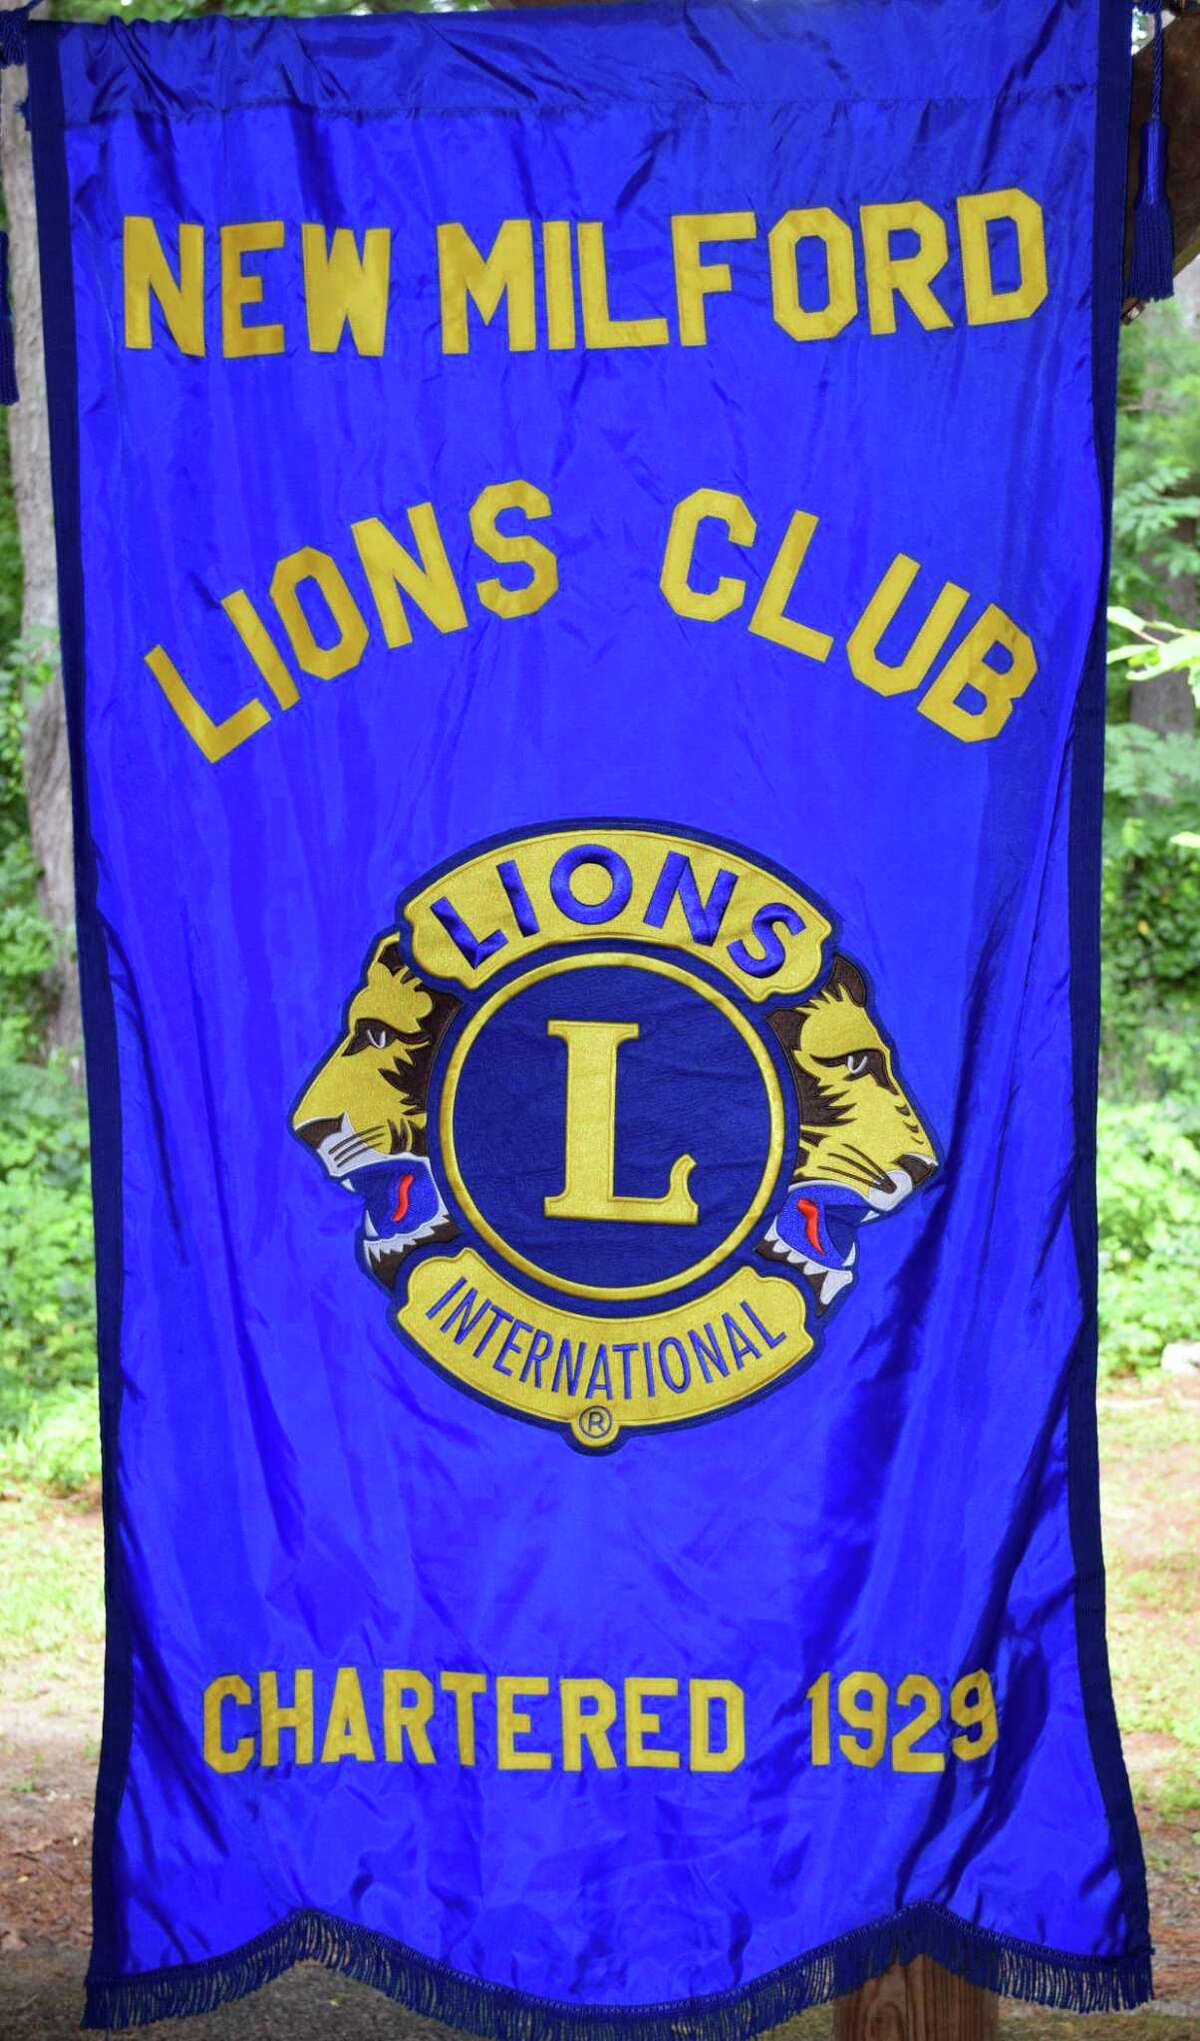 Spectrum/The New Milford Lions Club held its annual senior picnic Aug. 25, 2017, at Harrybrooke Park & Harden House Museum in town. The picnic was one of the club's largest in more recent years, drawing about 90 people. In addition to a lunch of hamburgers, hot dogs and side dishes, guests were treated to music and bingo.